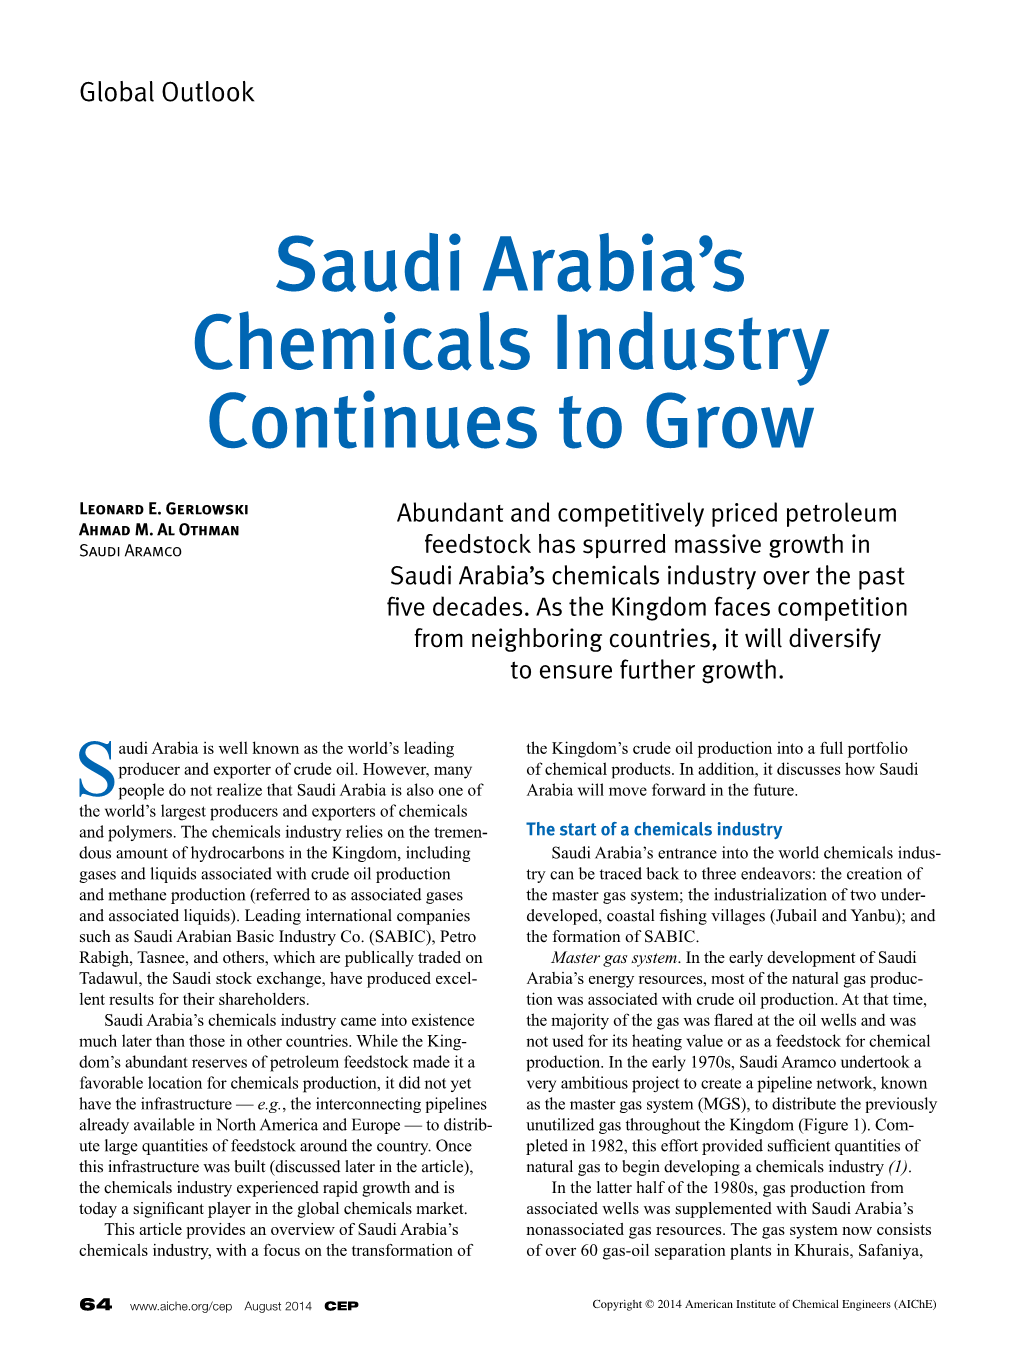 Saudi Arabia's Chemicals Industry Continues to Grow